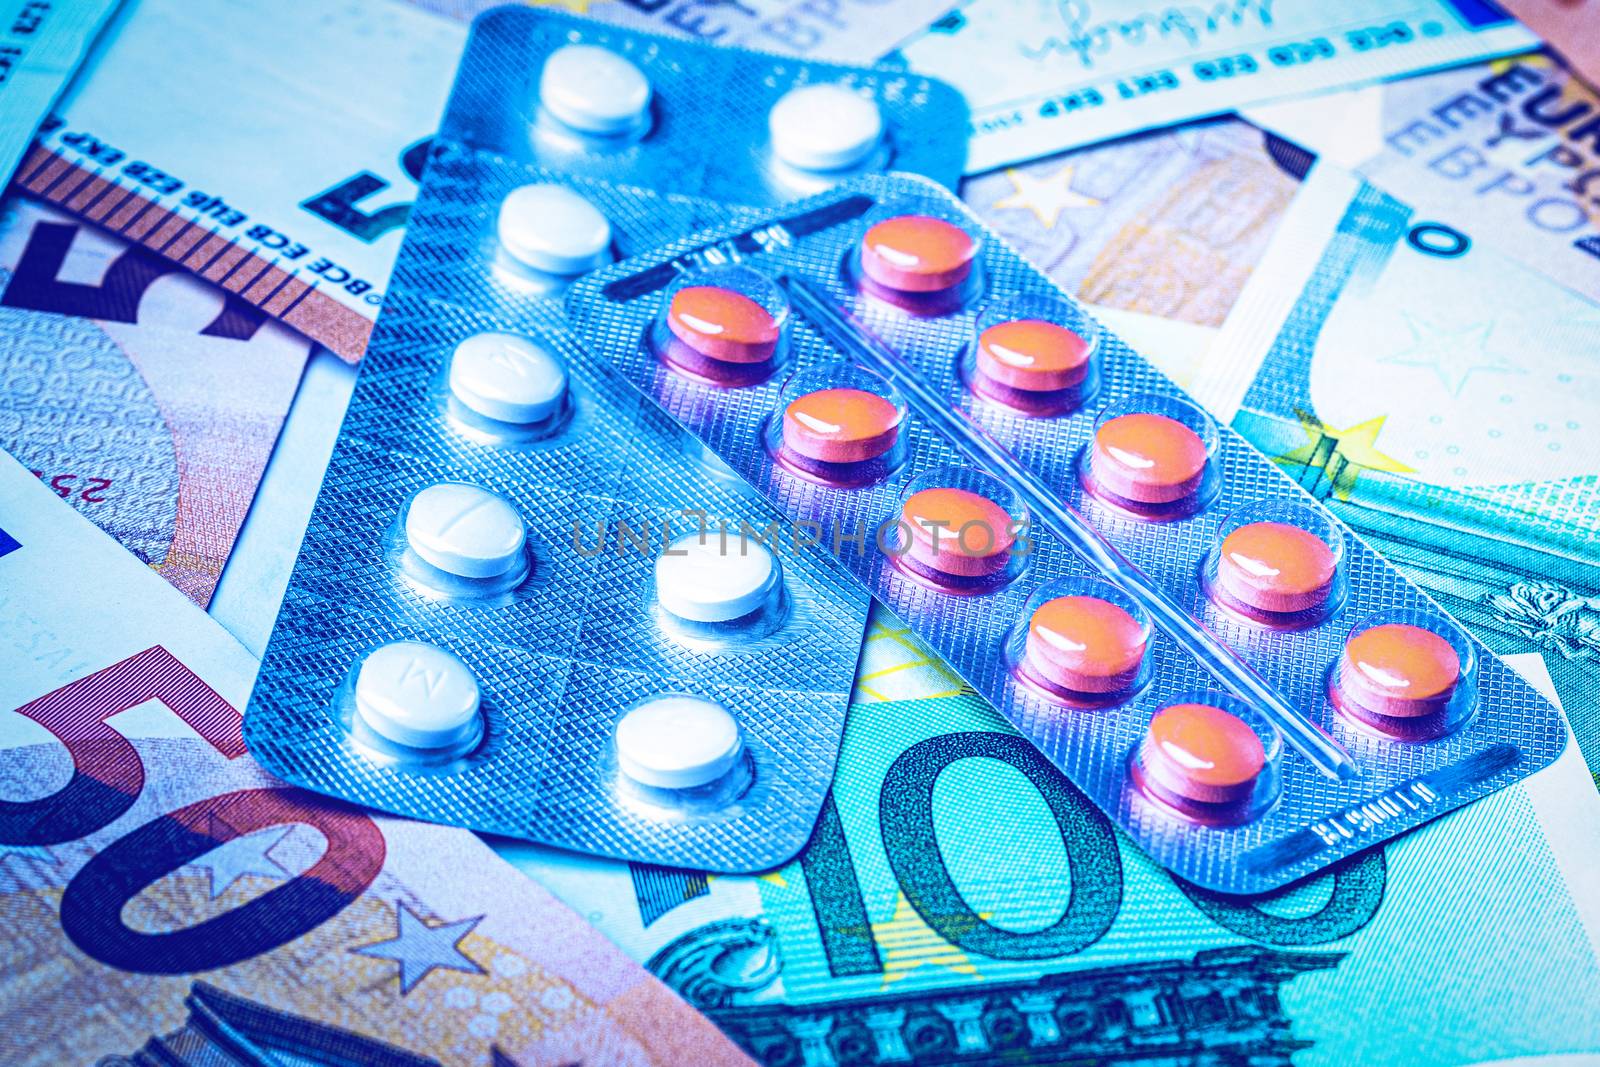 Plate with pills on the background of euro bills. The concept of the expensive cost of healthcare or financing medicine.